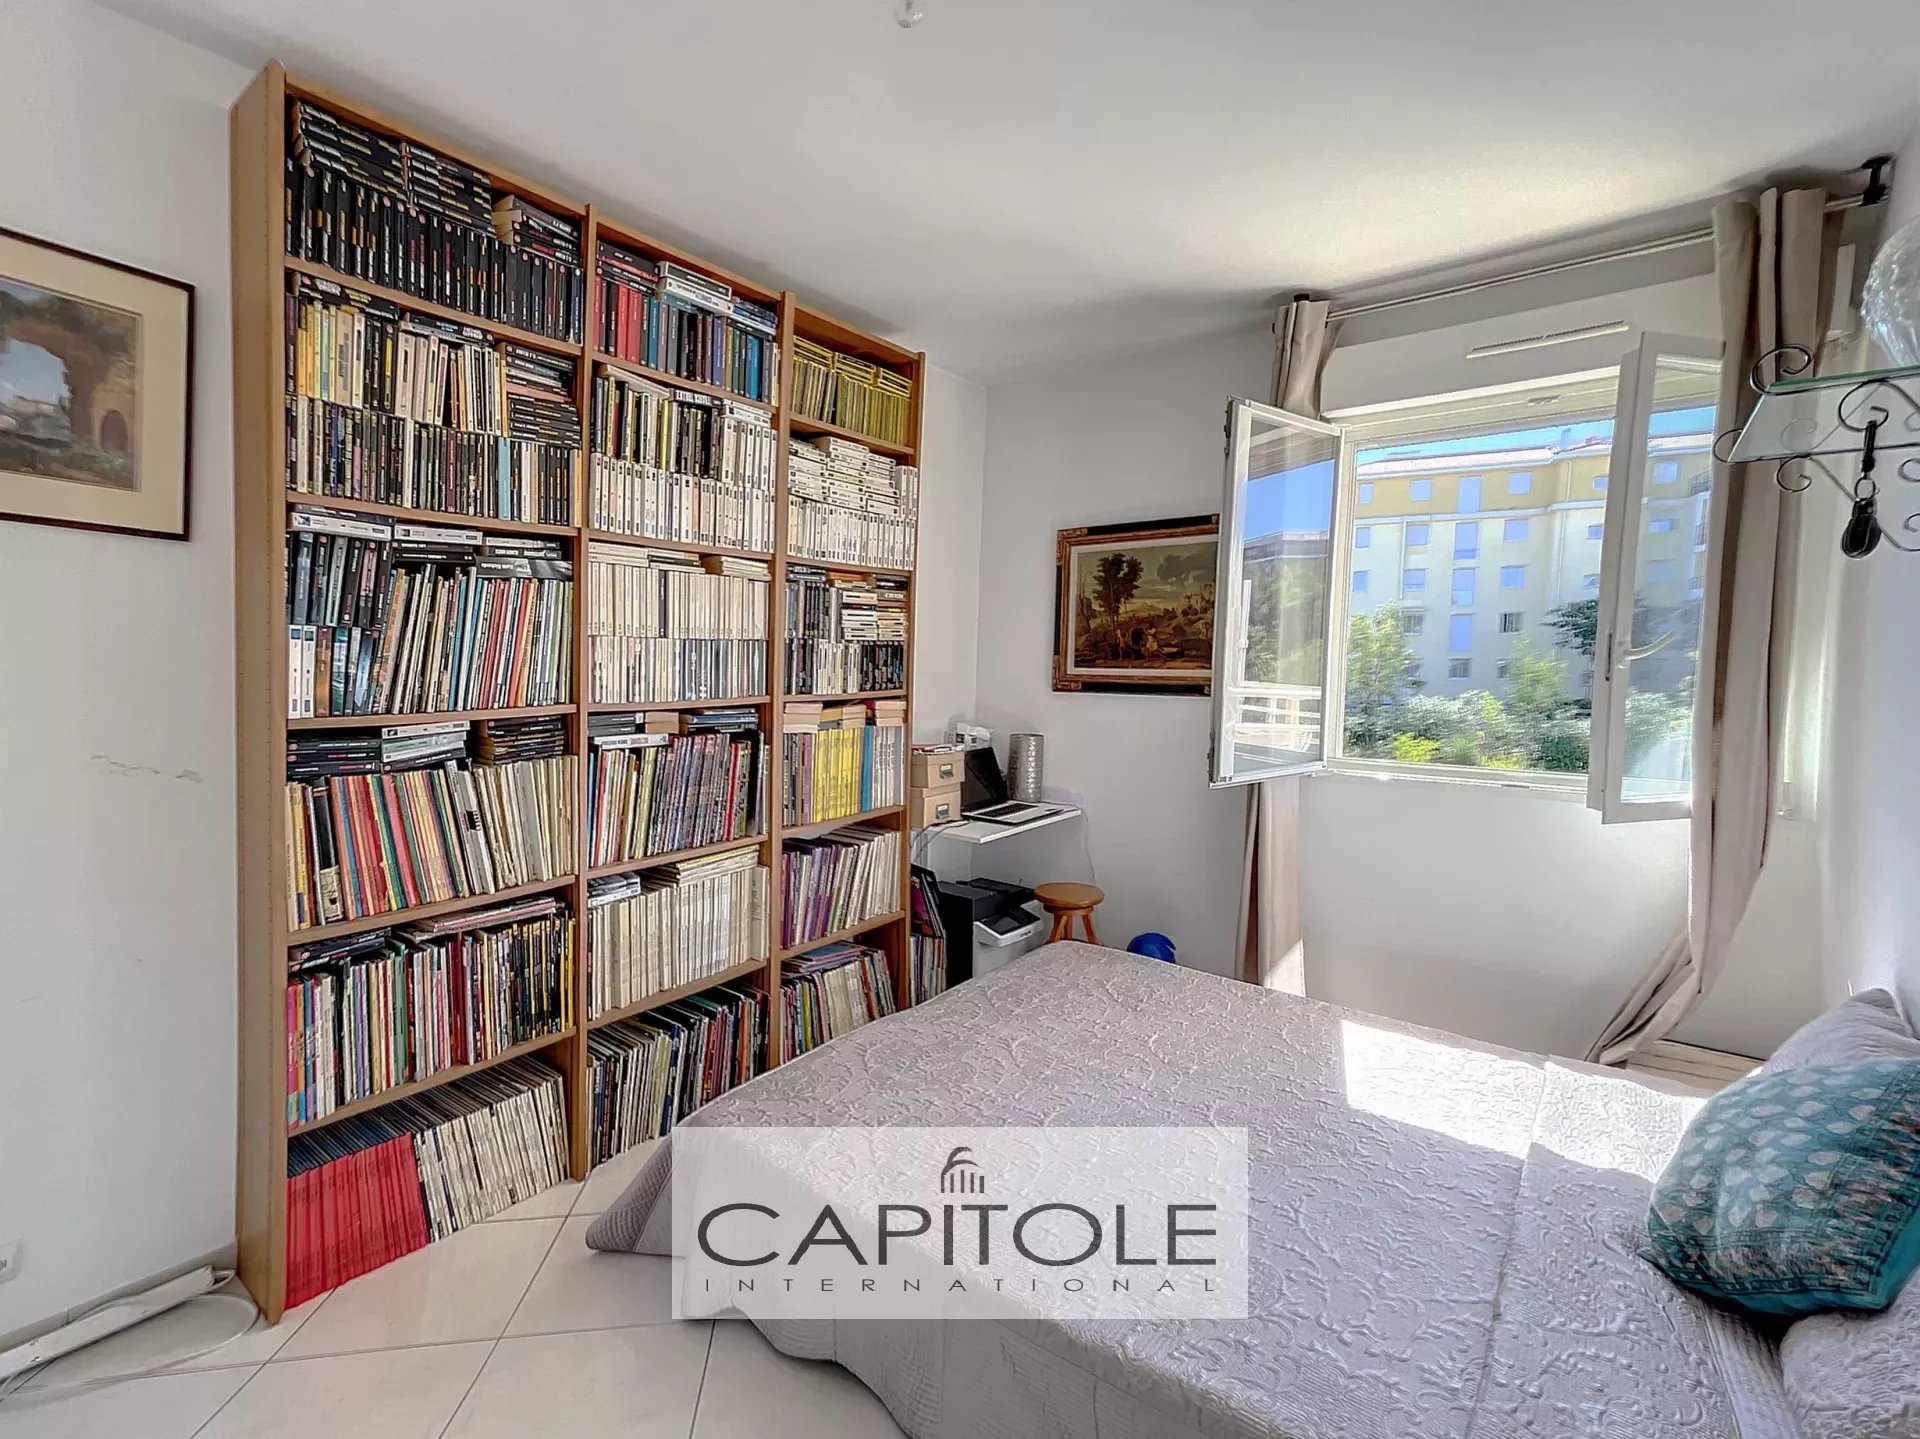 Antibes  for sale  top floor apartment  of 82m² with corner terrasse of 70m²